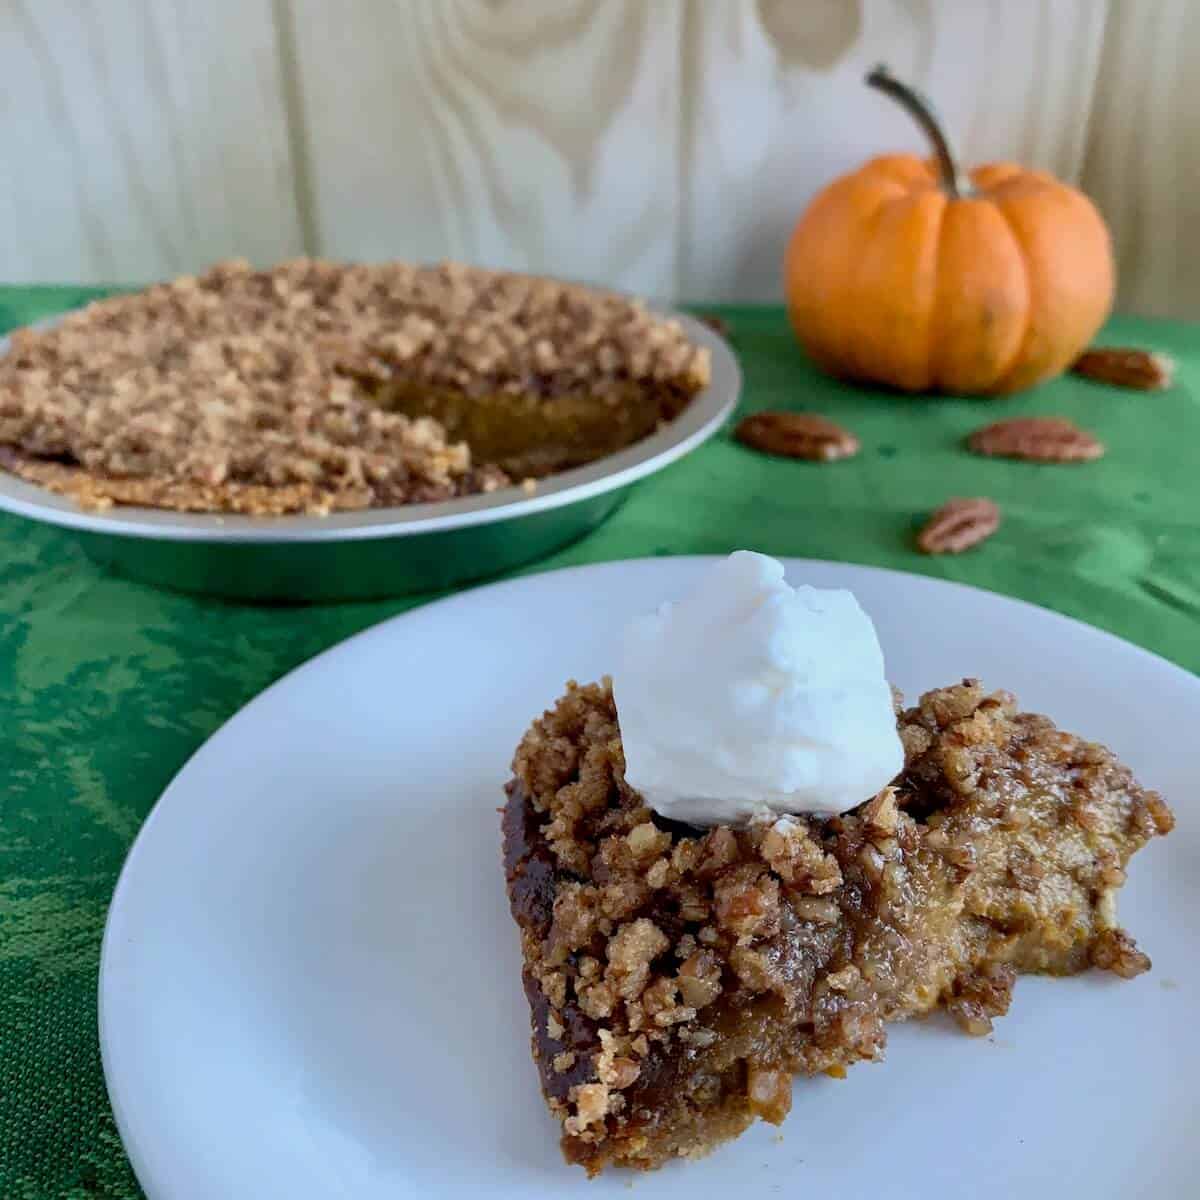 Praline Pumpkin Pie in pie pan with a slice topped with whipped cream on a white plate next to pumpkin & scattered pecans.